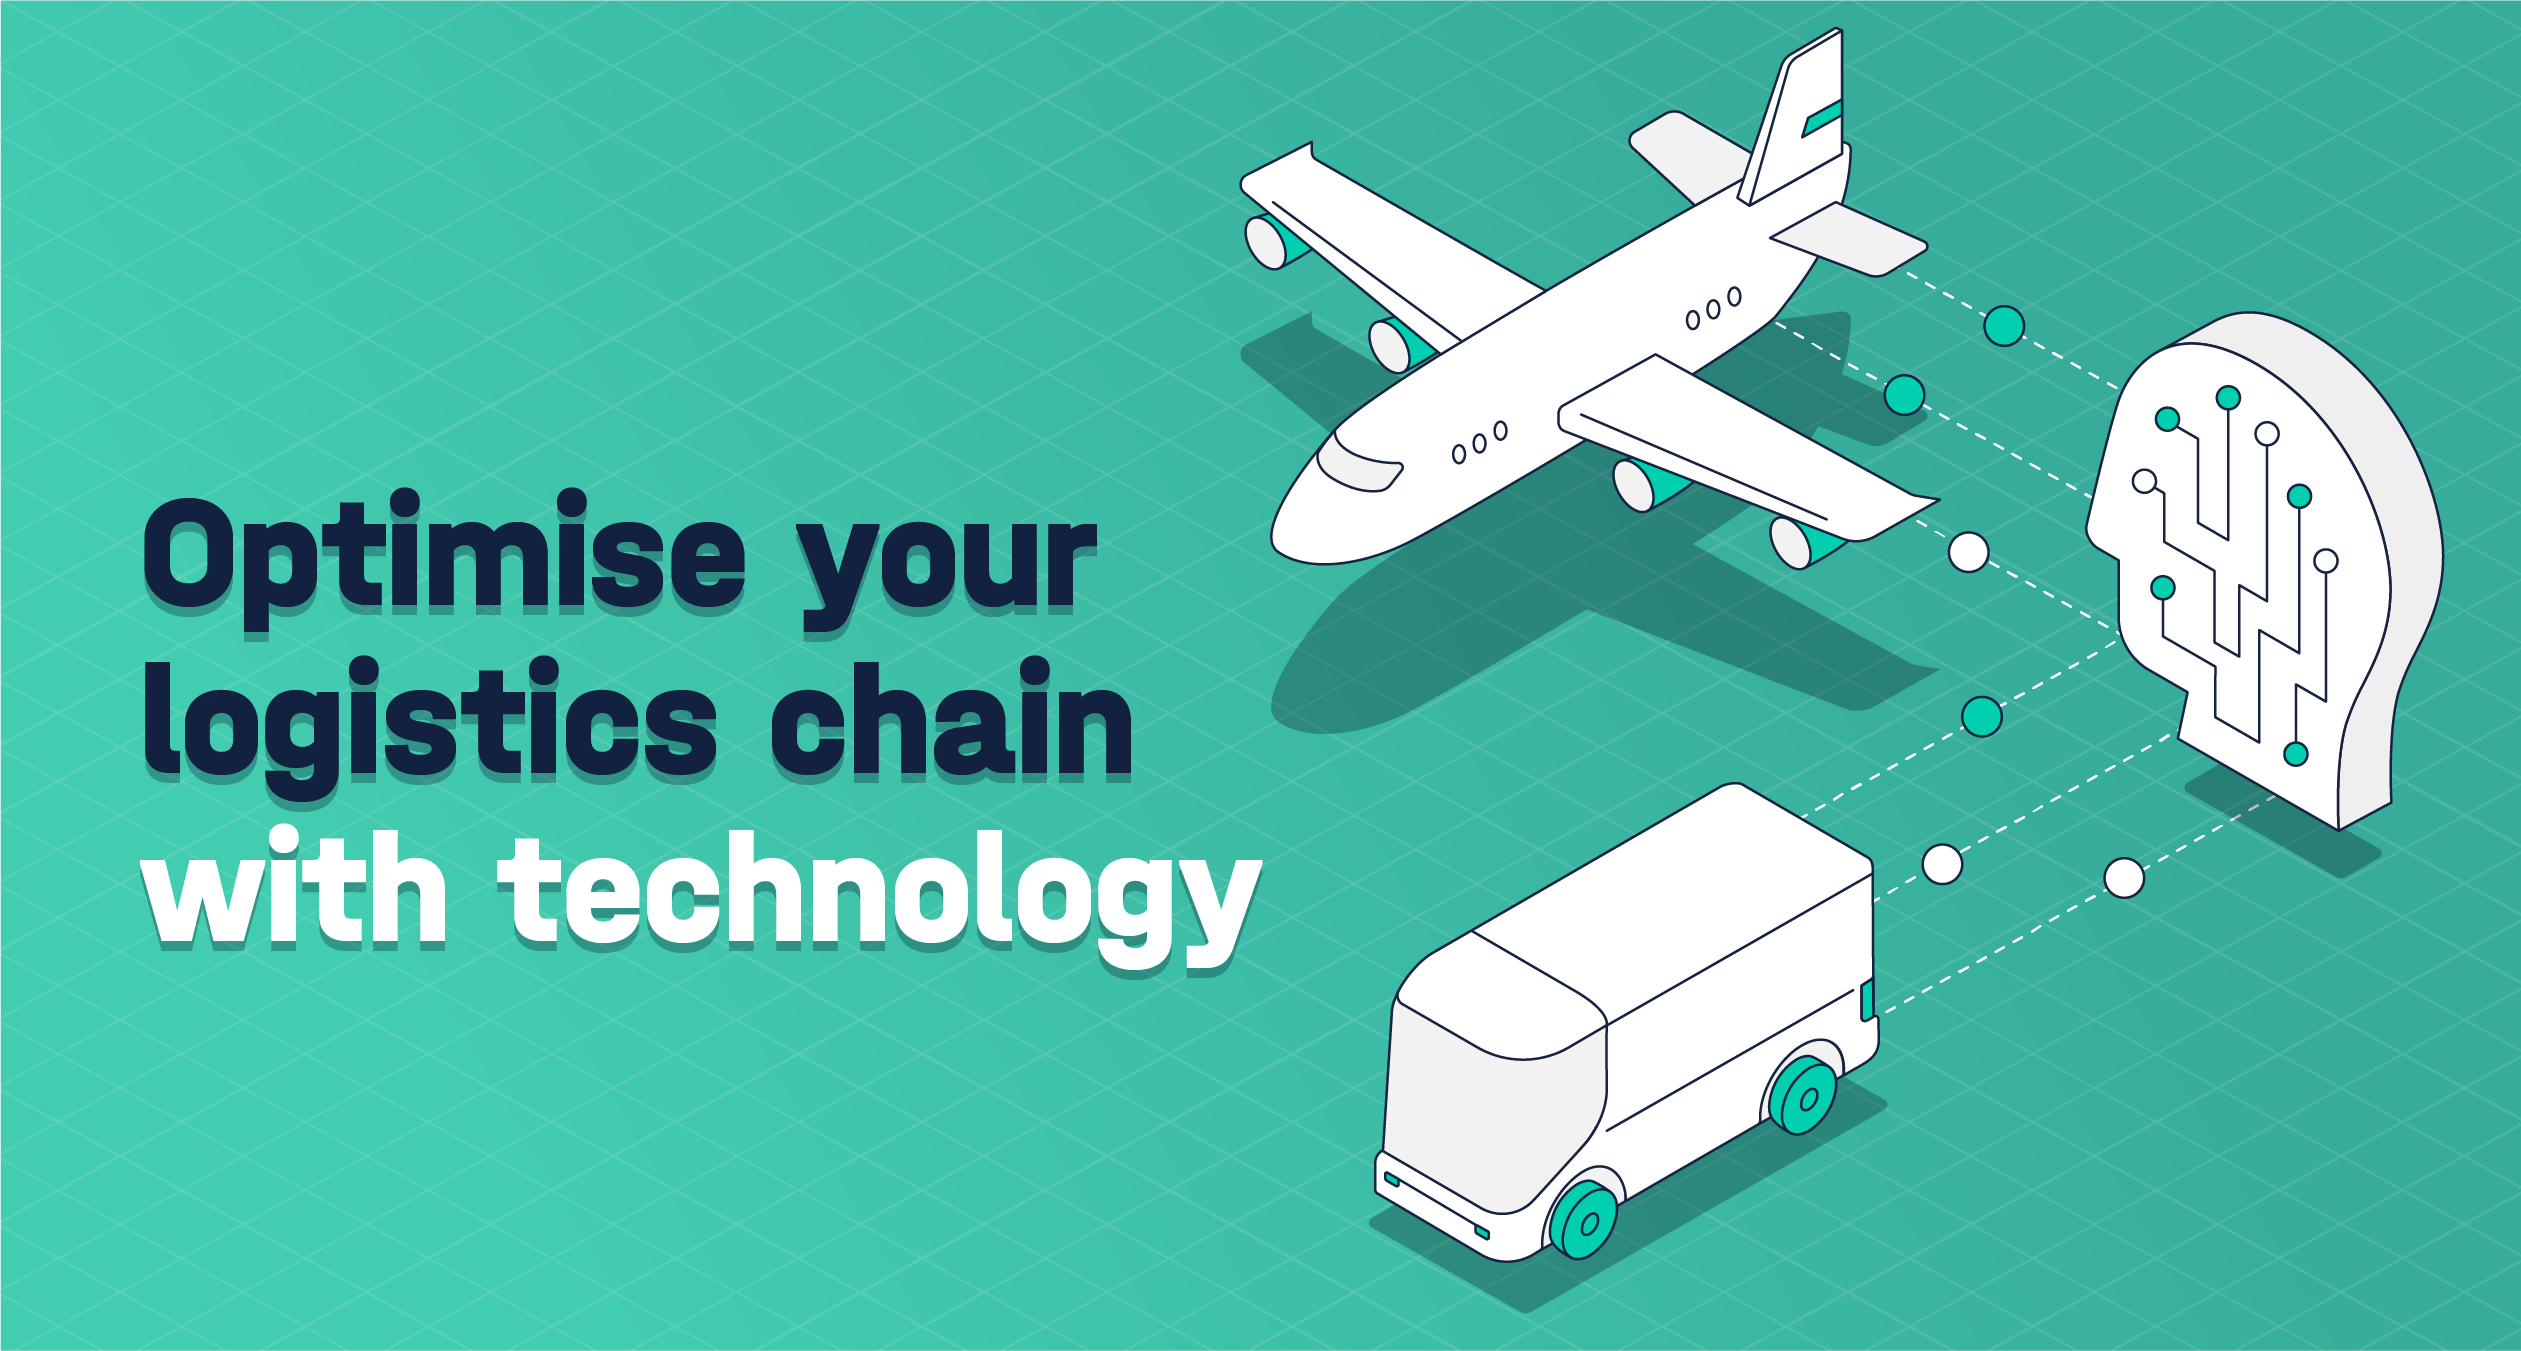 Optimise your logistics chain with technology